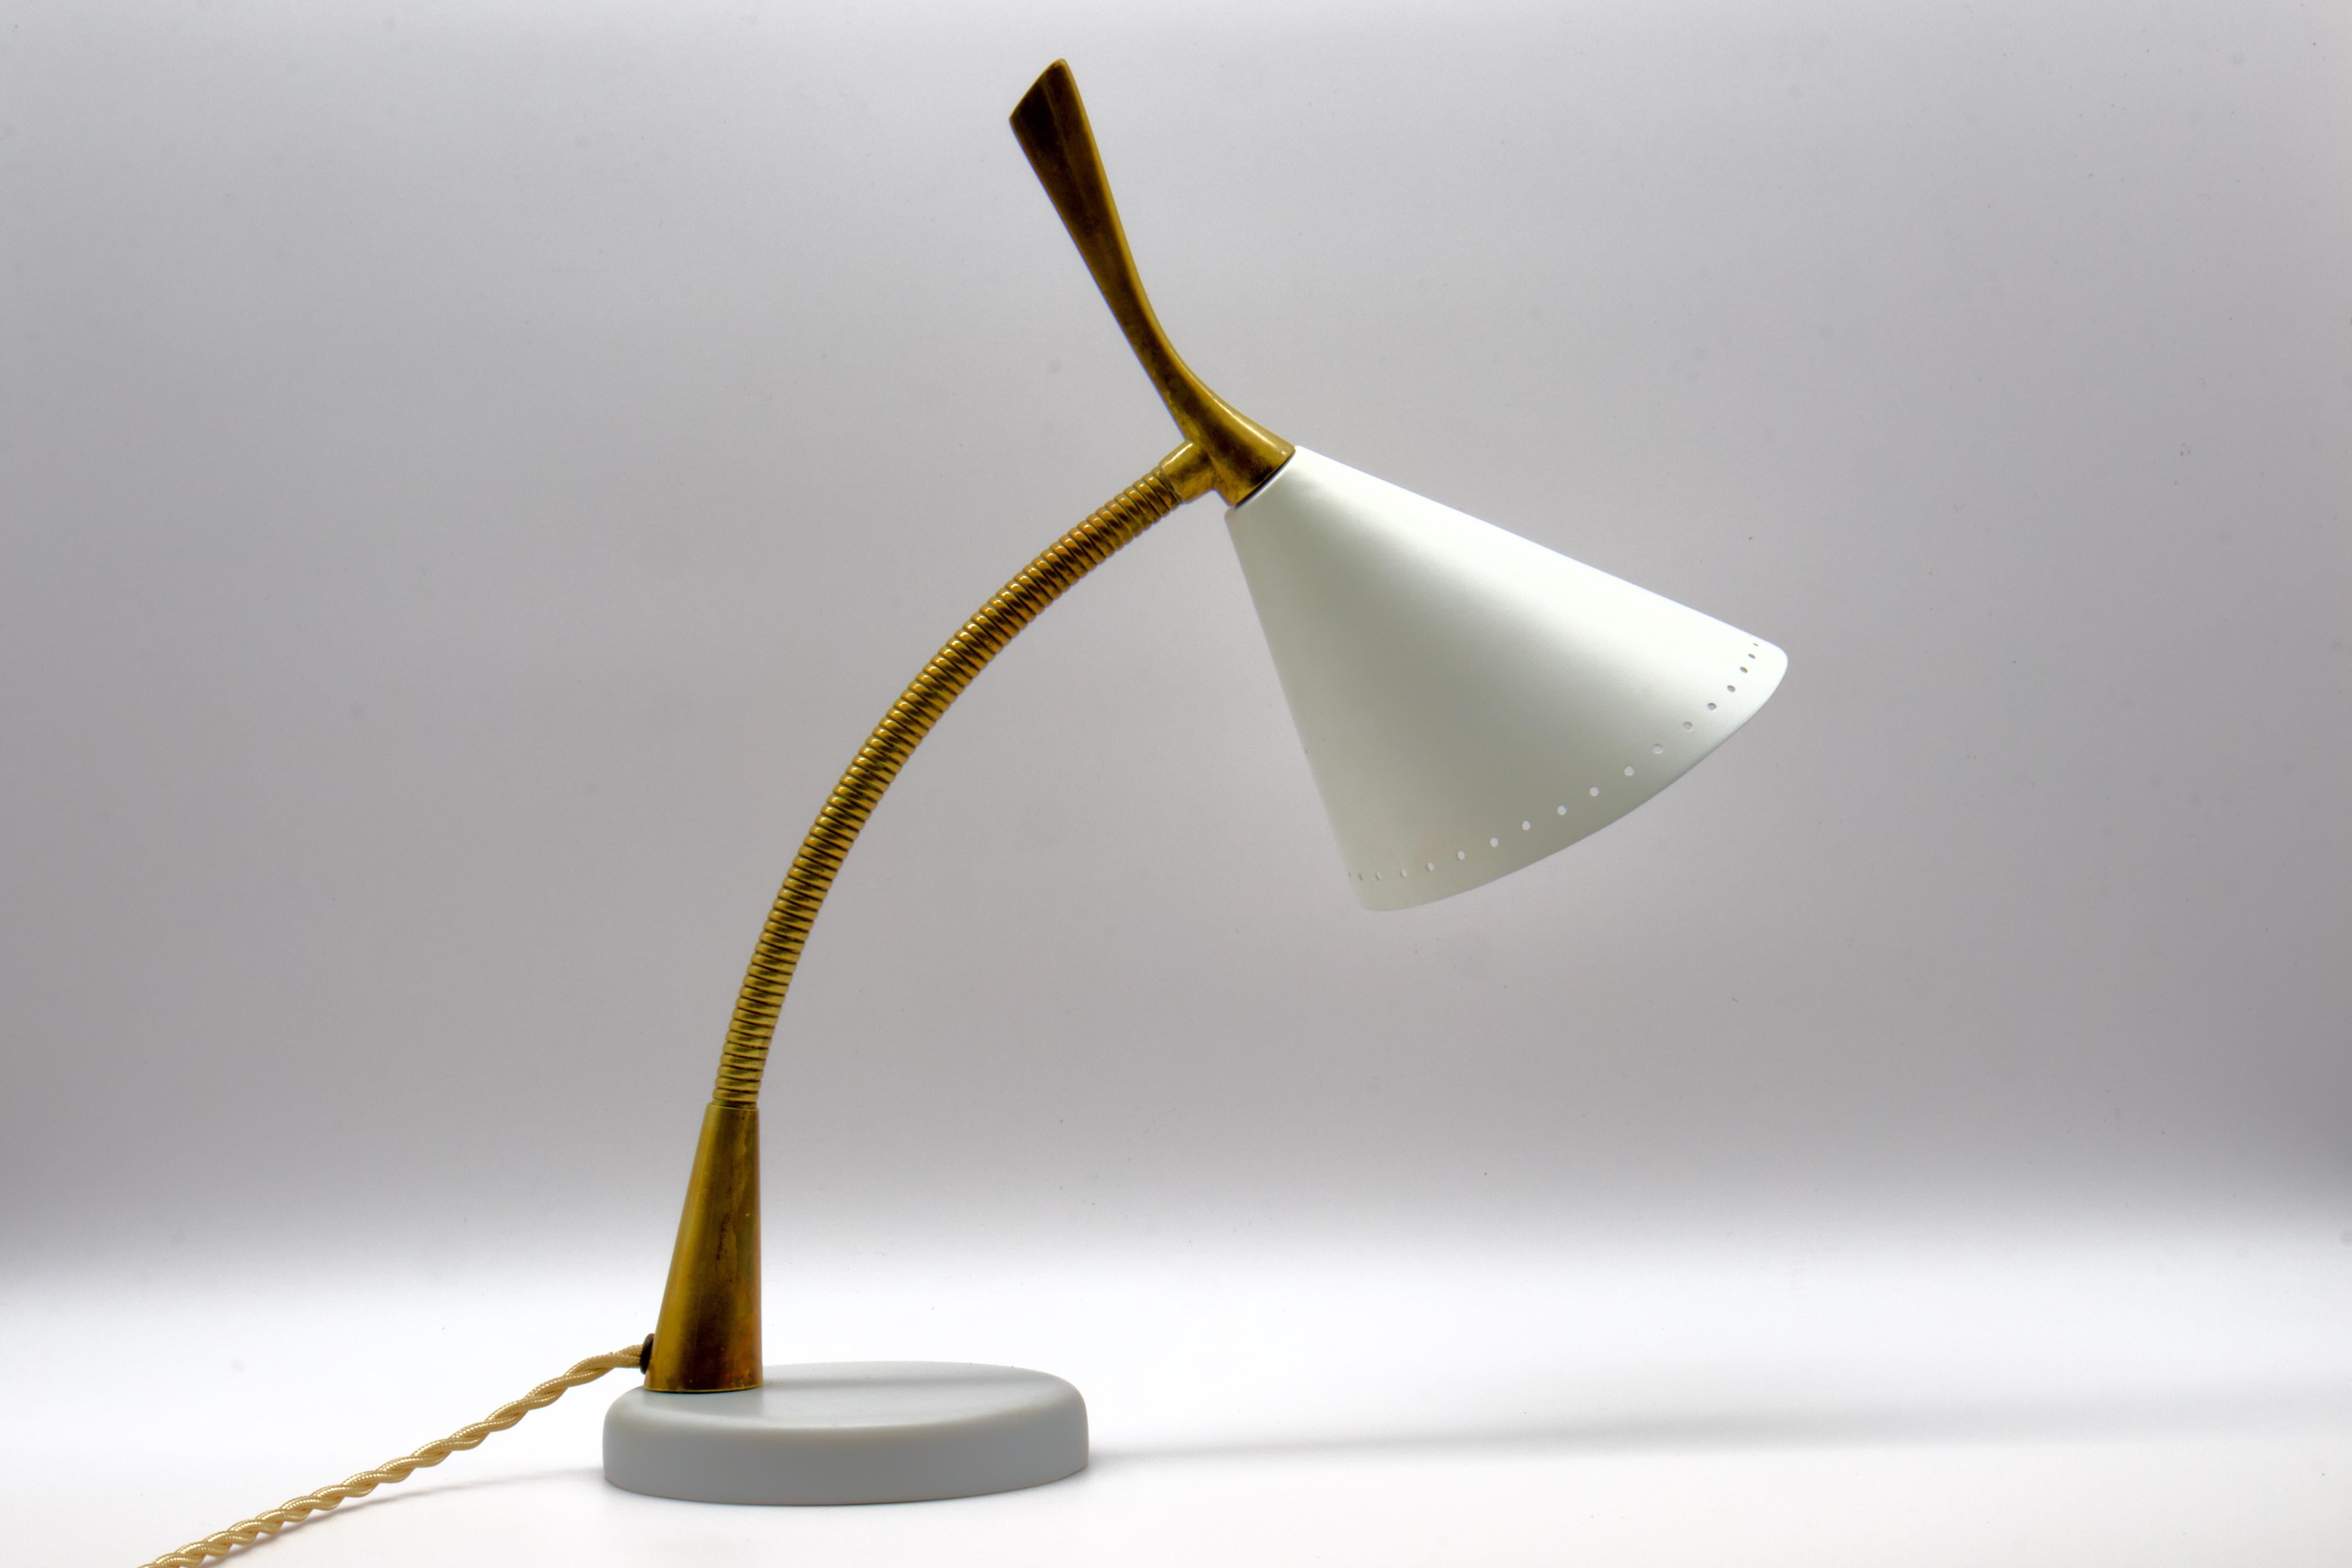 Stunning Oscar Torlasco table lamp for Lumi. 1950s Milano, Italy. Base in marble, articulating brass stem. Lacquered lamp shade in ivory white.